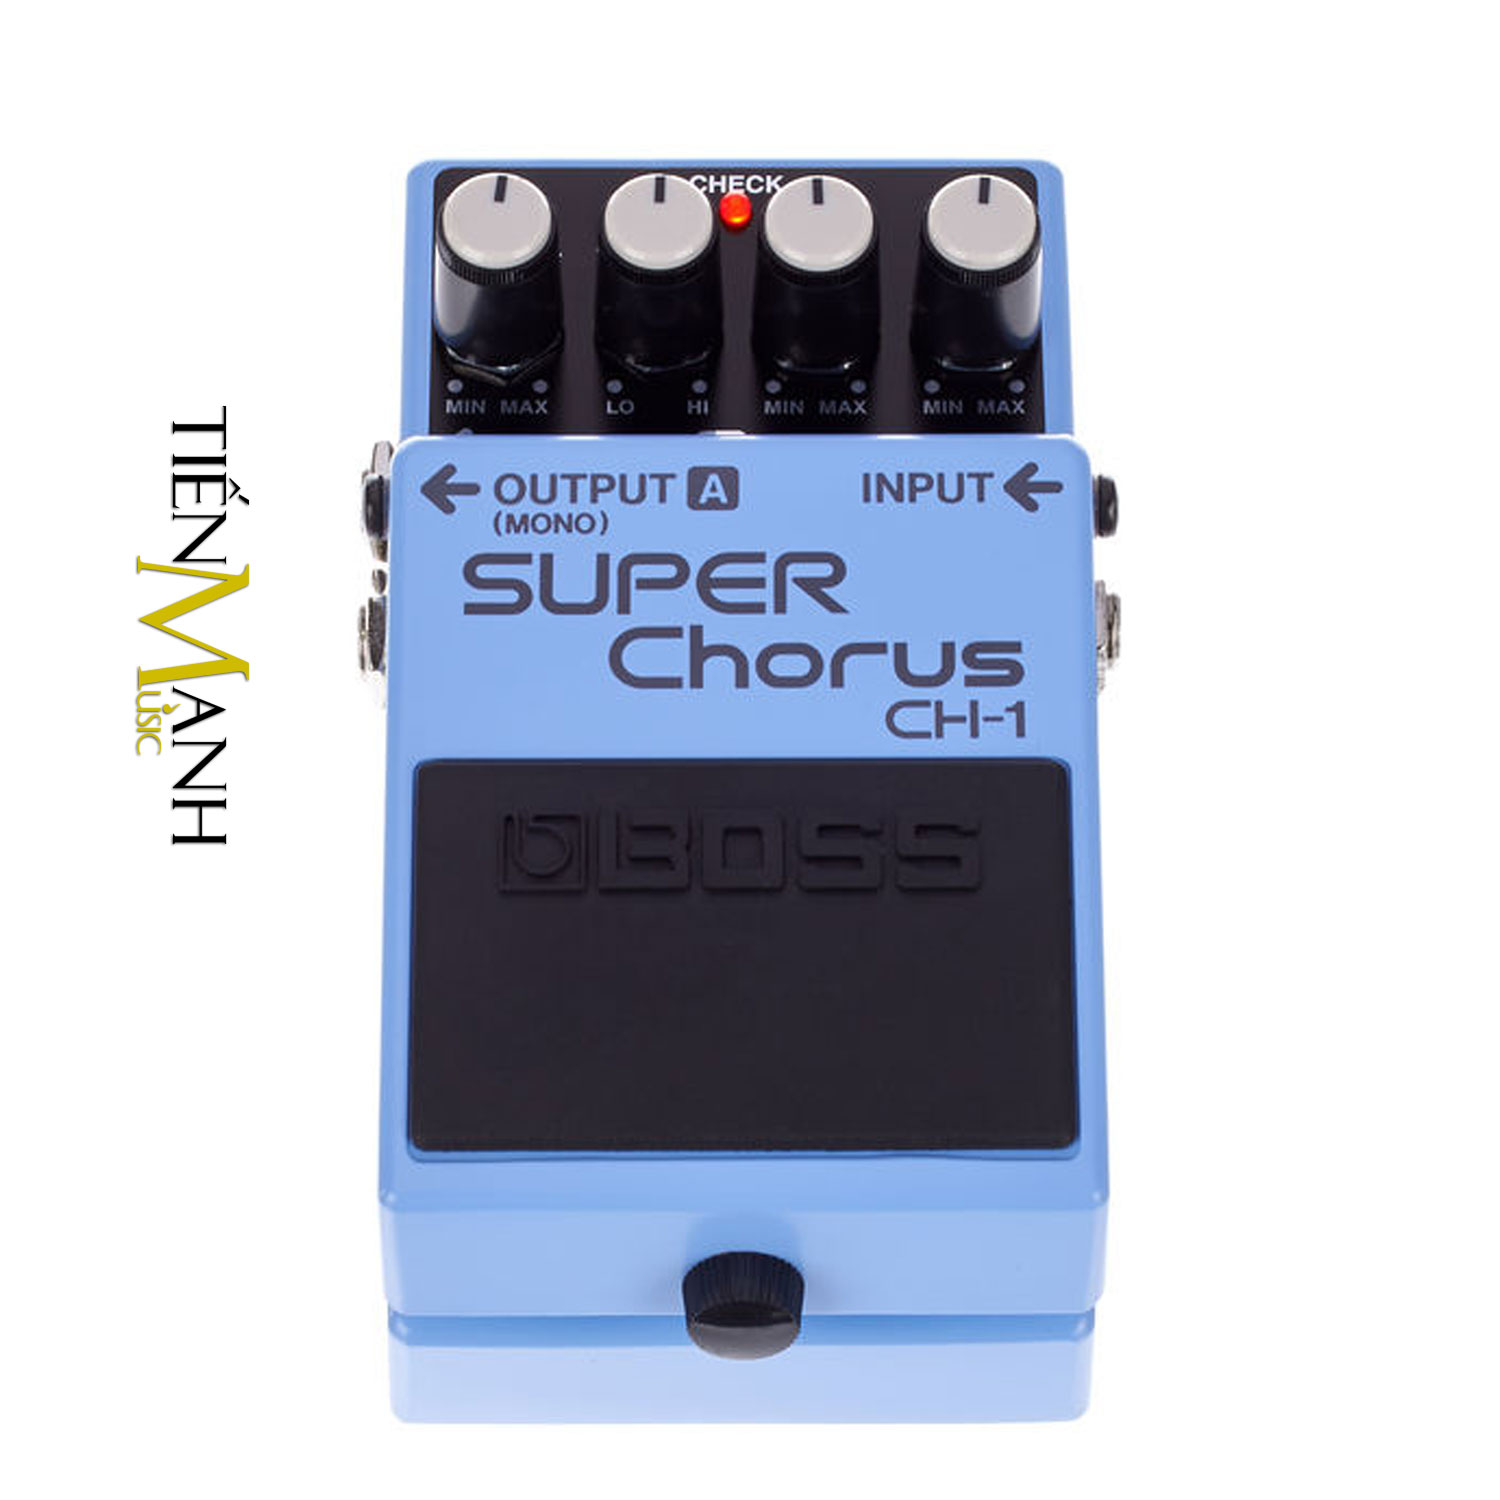 Gia-re-Pho-Guitar-Boss-CH-1-Compression-Sustainer.jpg